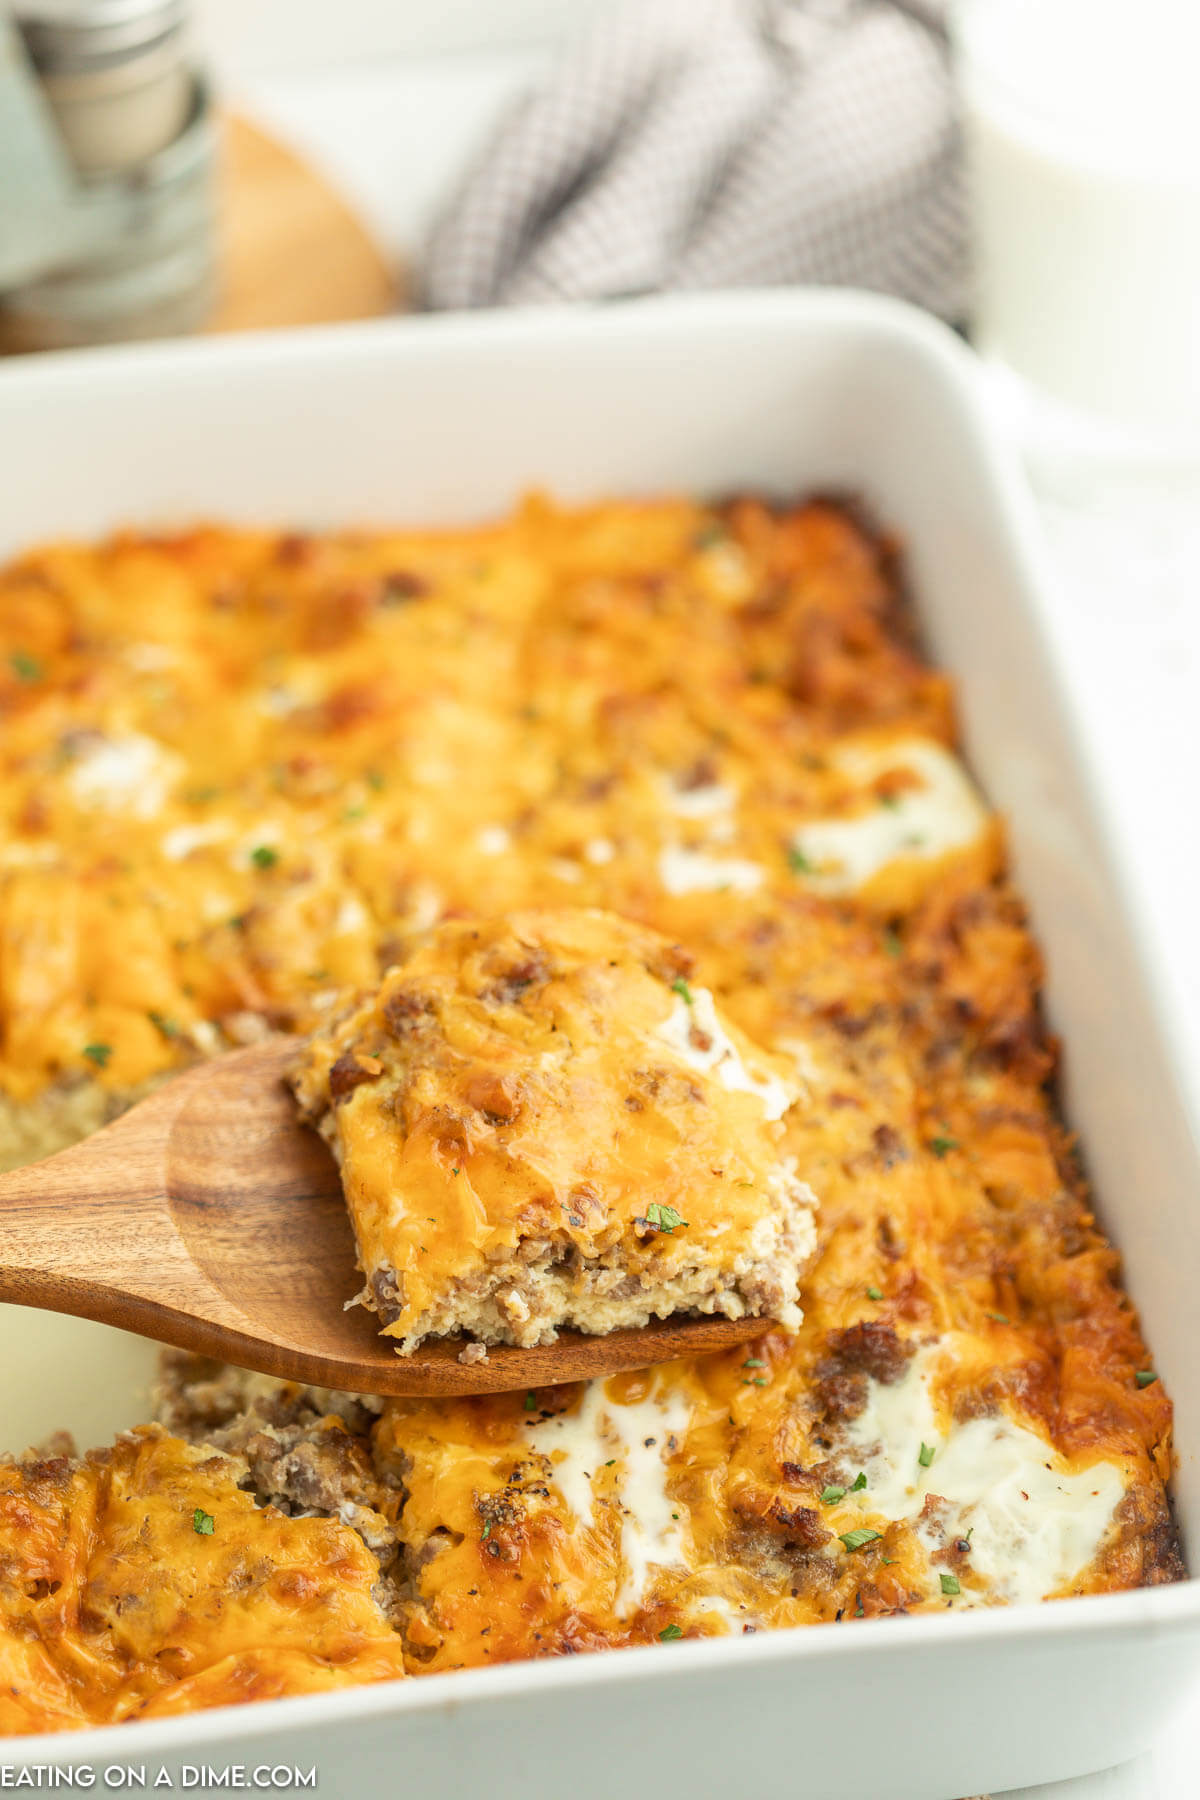 Breakfast Casserole in a baking dish with a serving on a wooden spatula